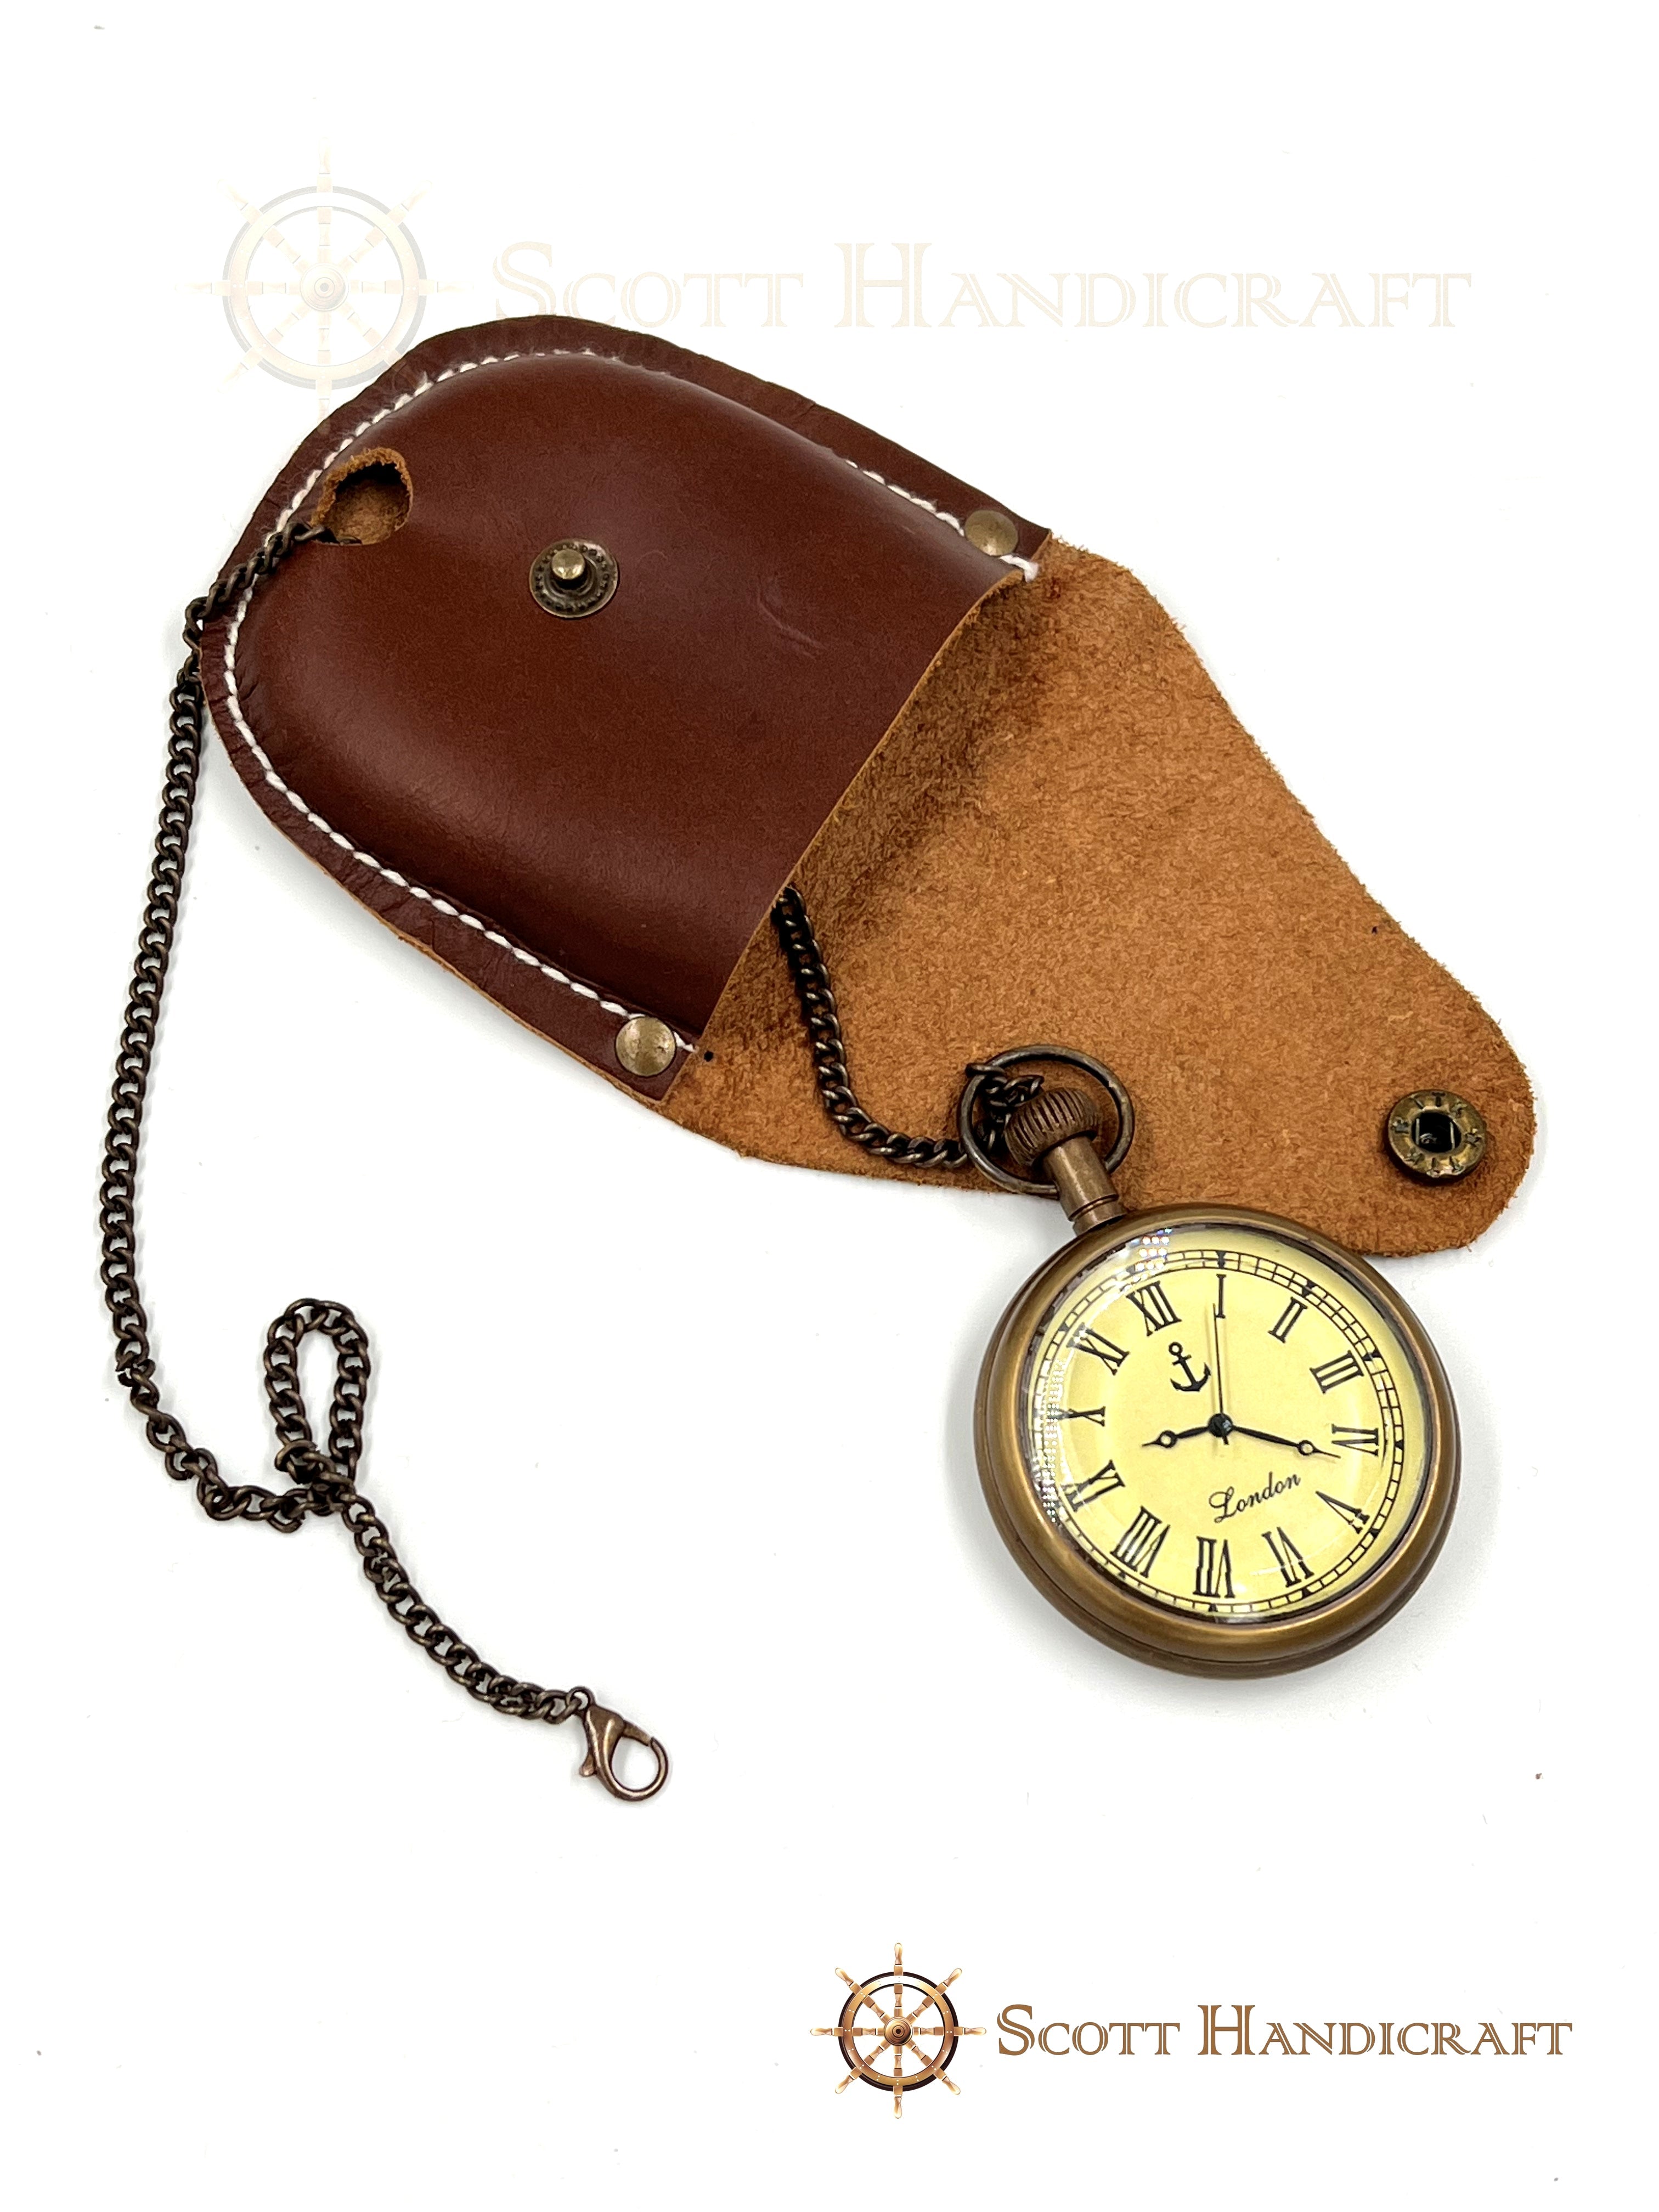 Victoria London Antiqued Brass Pocket Watch with Leather Case - Antique Vintage Style